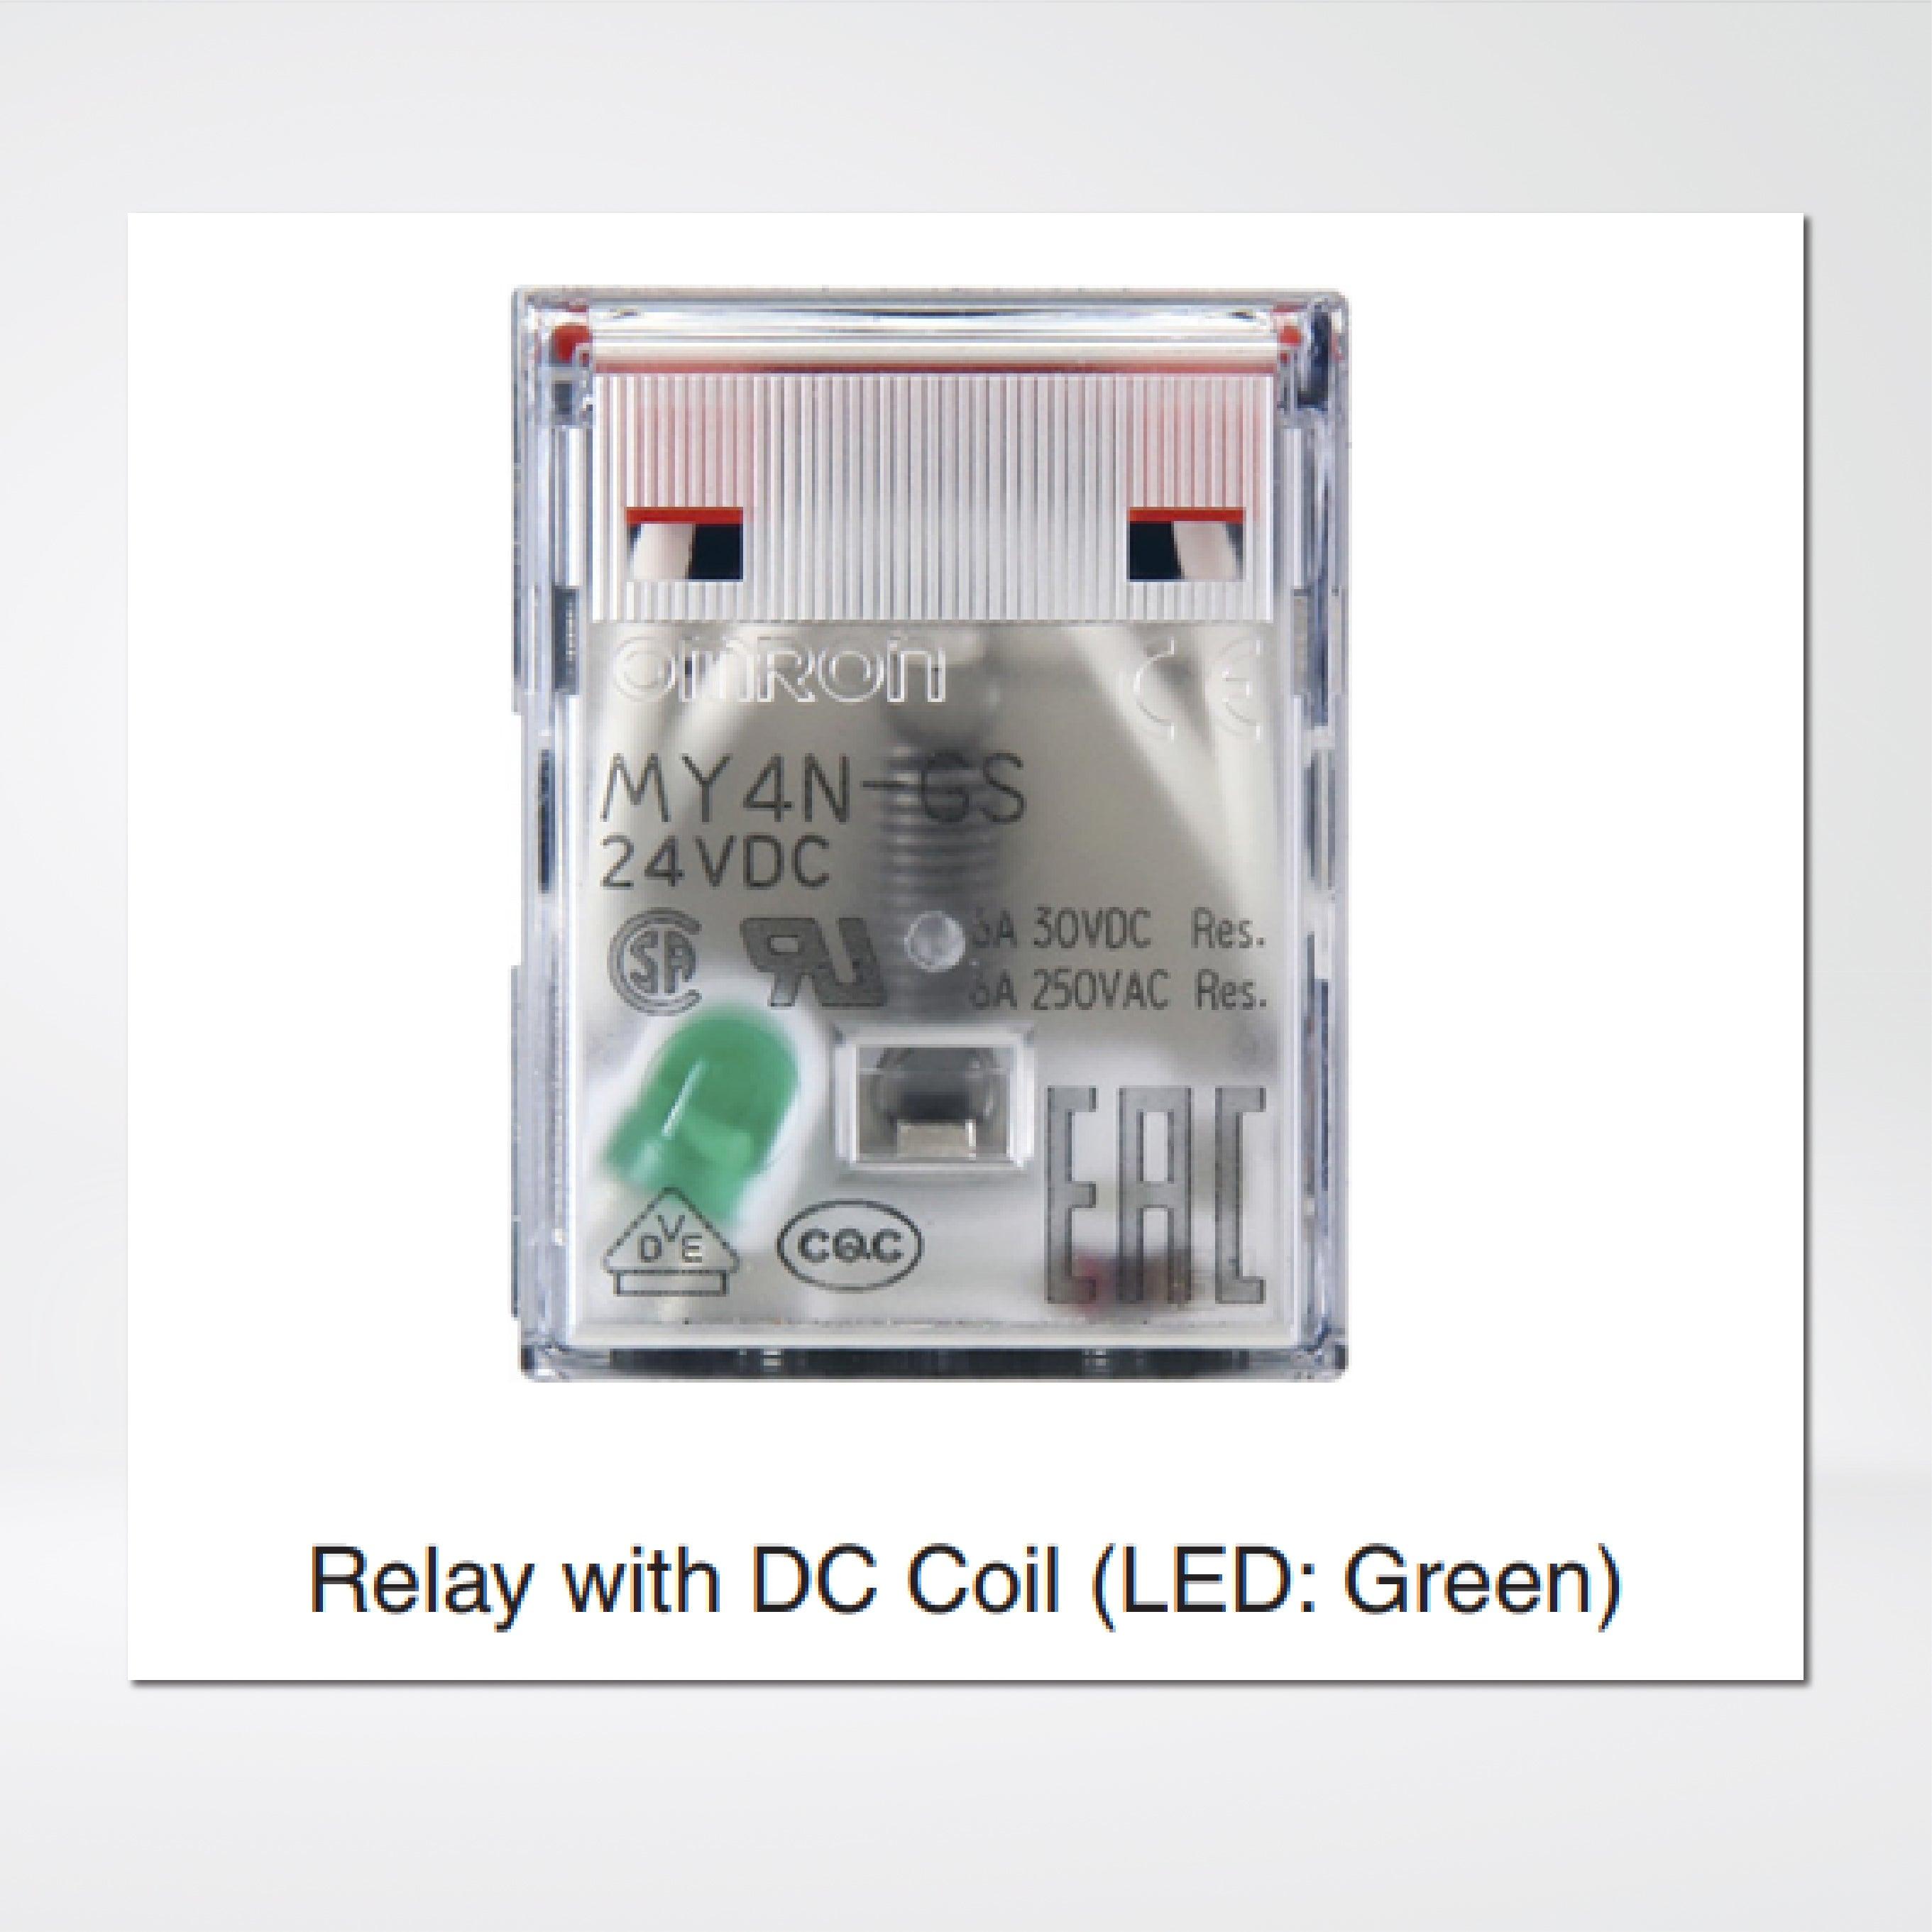 MY4N-GS DC24 BY OMZ Relay, plug-in, 14-pin, 4PDT, 3 A, mechanical & LED indicators, 24 VDC - Riverplus